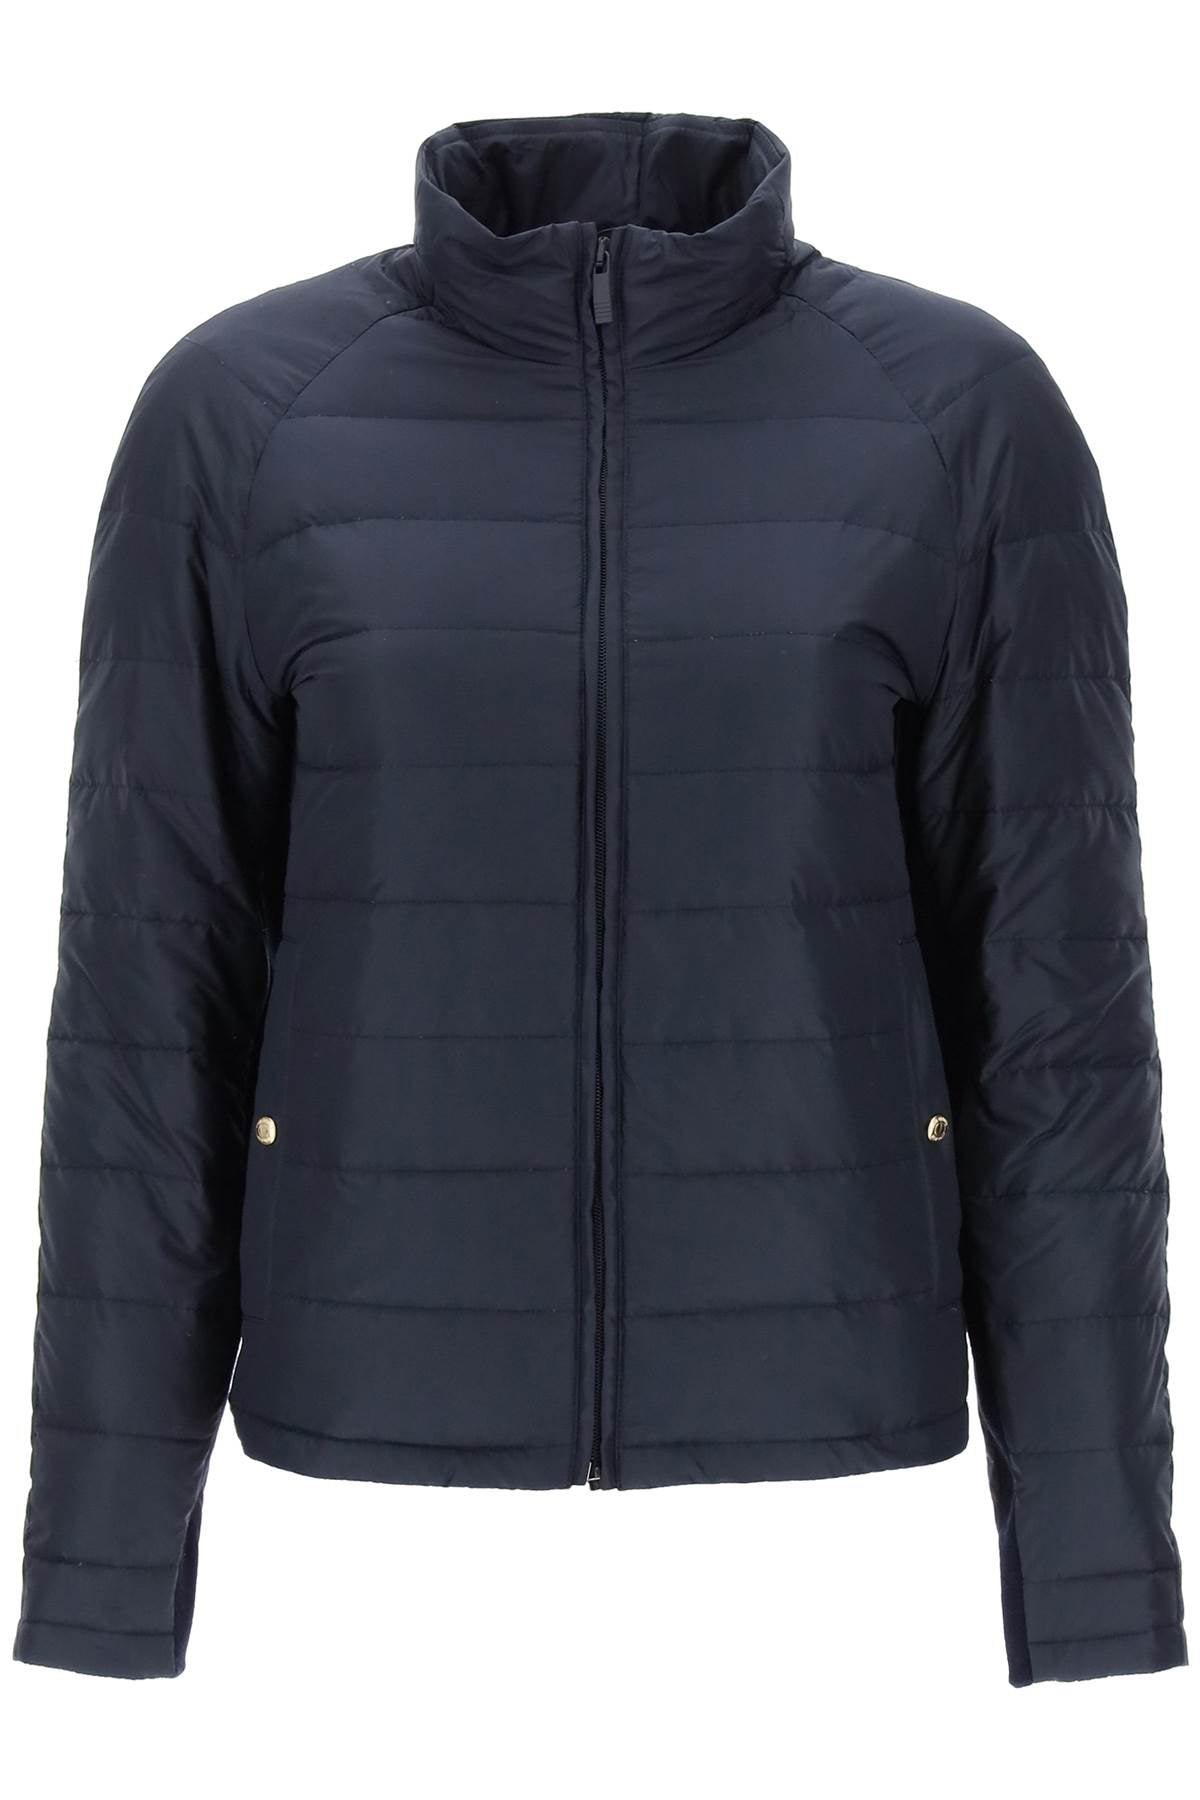 Thom browne quilted puffer jacket with 4-bar insert-0